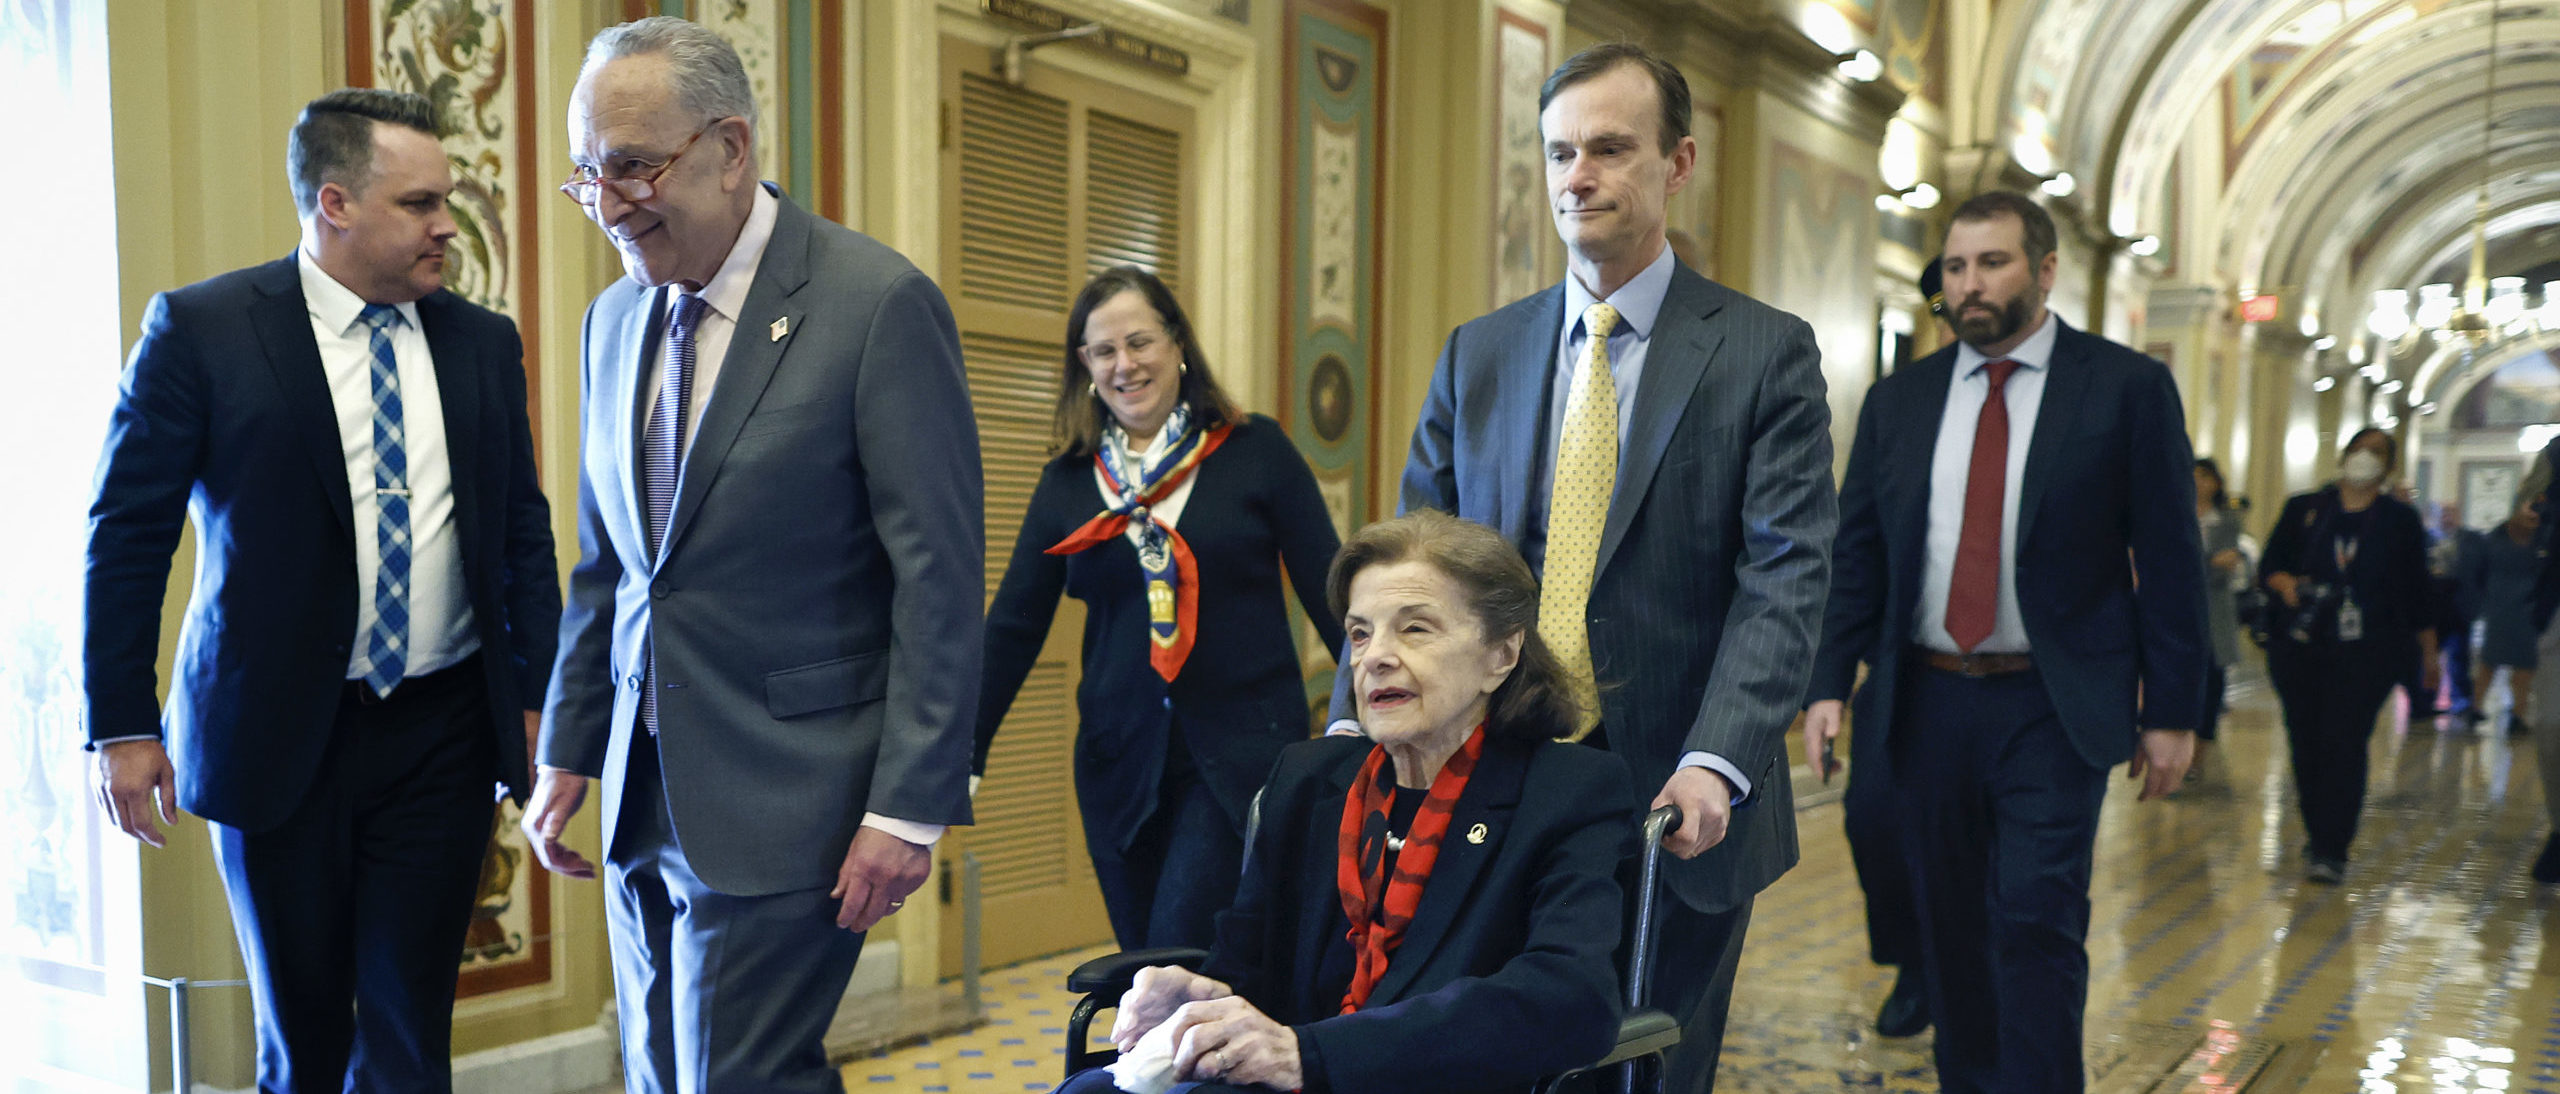 WASHINGTON, DC - MAY 10: U.S. Senate Majority Leader Charles Schumer (D-NY) escorts Sen. Dianne Feinstein (D-CA) as she arrives at the U.S. Capitol following a long absence due to health issues on May 10, 2023 in Washington, DC. Feinstein was fighting a case of shingles and has been absent from the Senate for almost three months. (Photo by Kevin Dietsch/Getty Images)